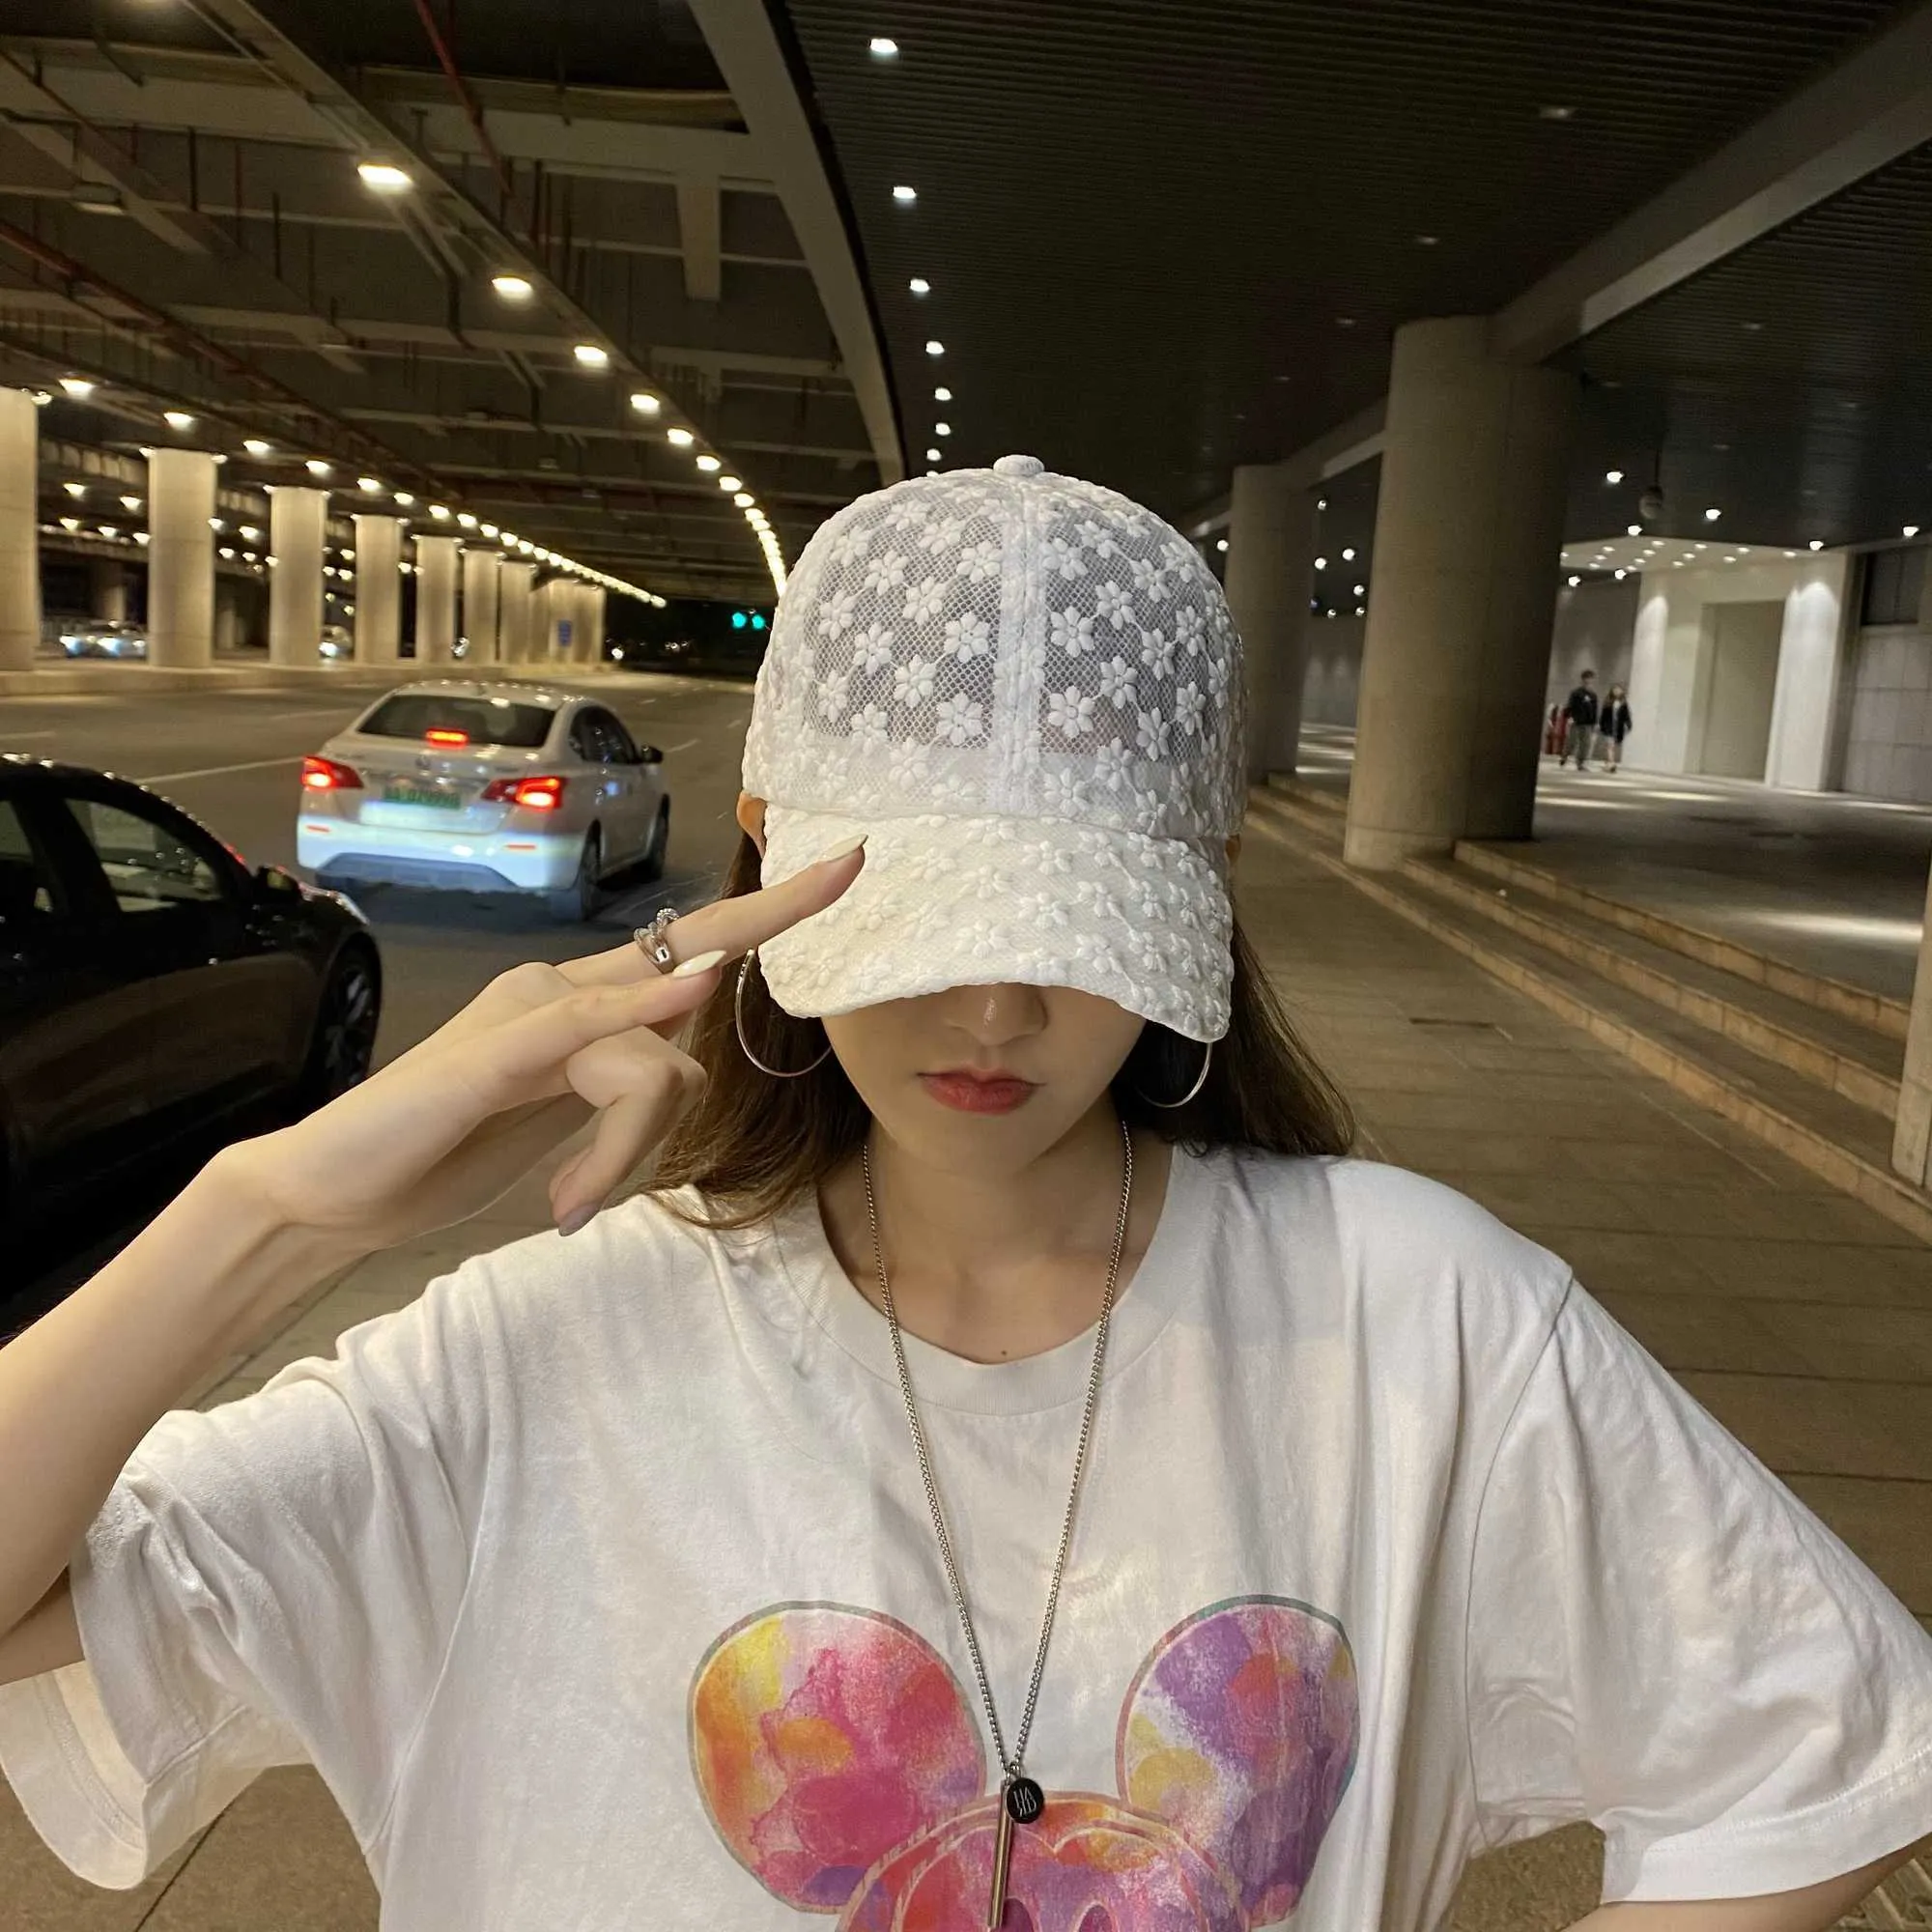 Breathable Lace Flower Mesh Sequin Baseball Cap For Women Hollow Floral  Design With Sun Protection Visor White G230209 From Sihuai06, $8.06